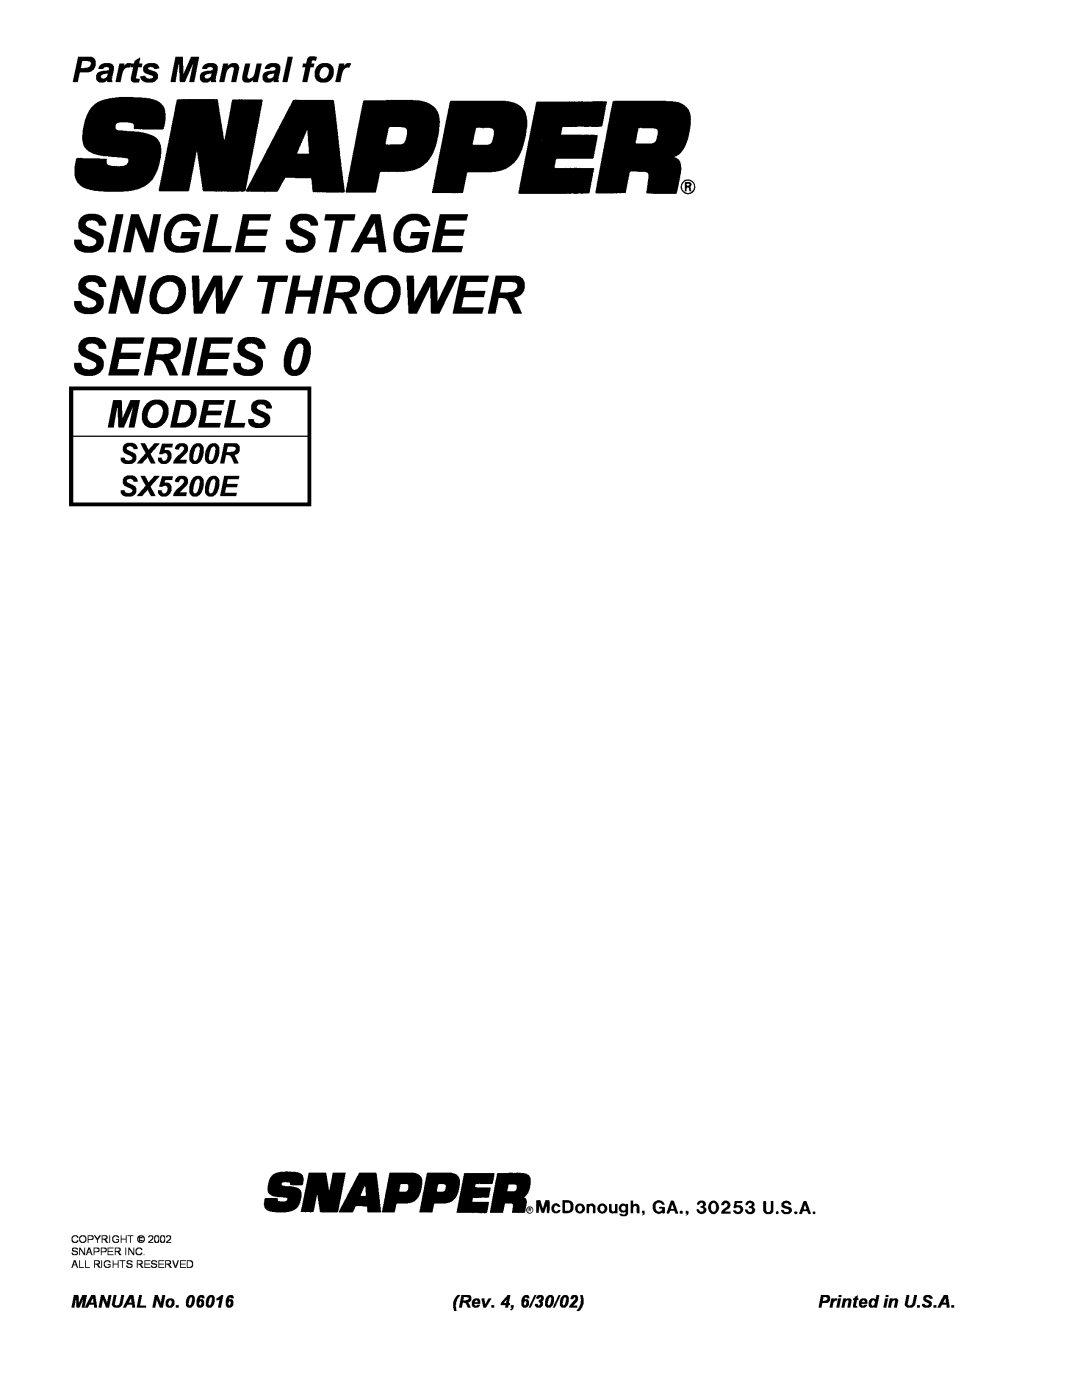 Snapper manual Printed in U.S.A, Single Stage Snow Thrower Series, Models, Parts Manual for, SX5200R SX5200E, MANUAL No 